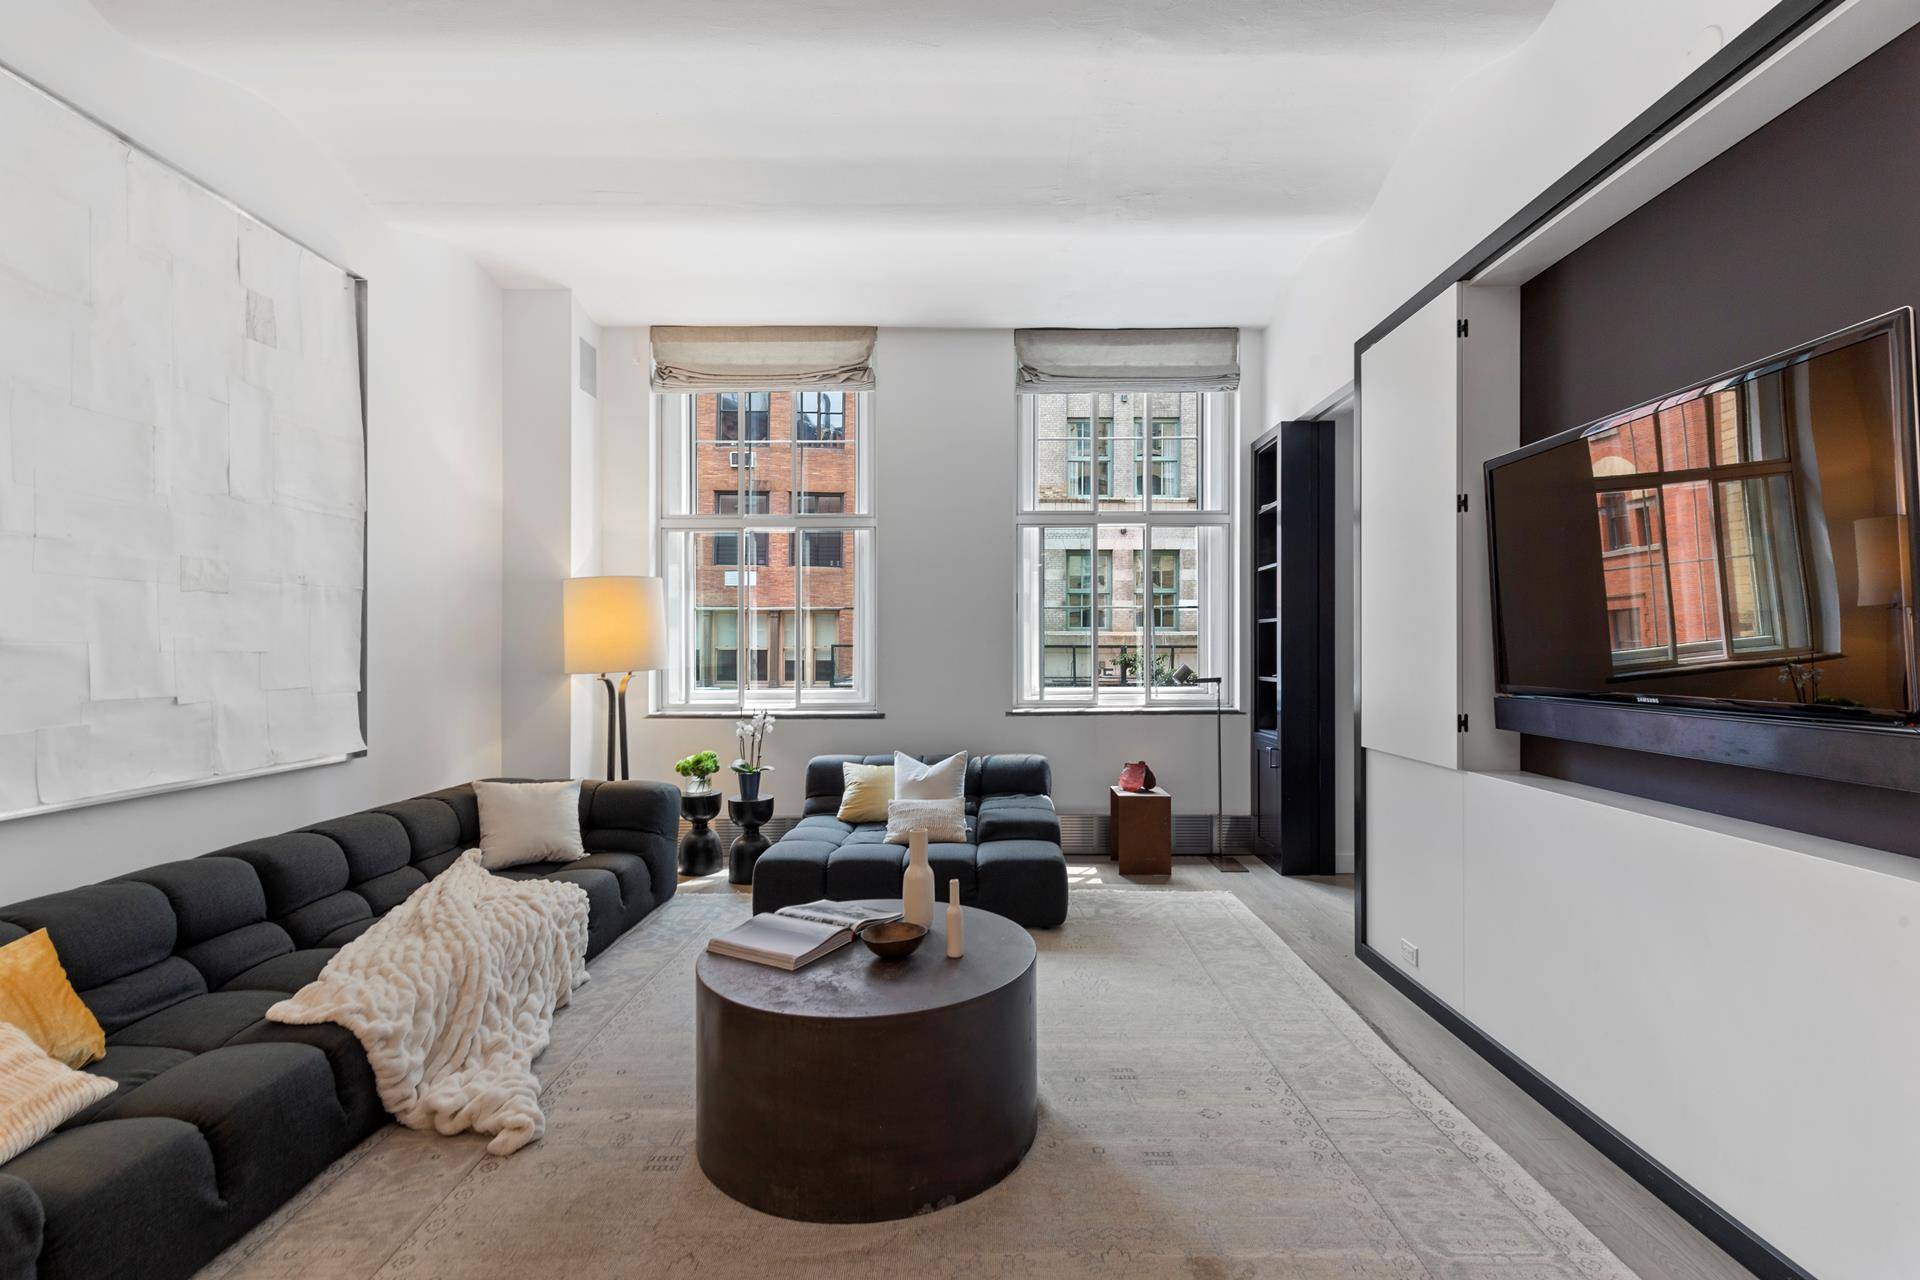 NEW TO MARKET ! STUNNING AUTHENTIC TRIBECA ARTIST LOFT WITH 12 FT.